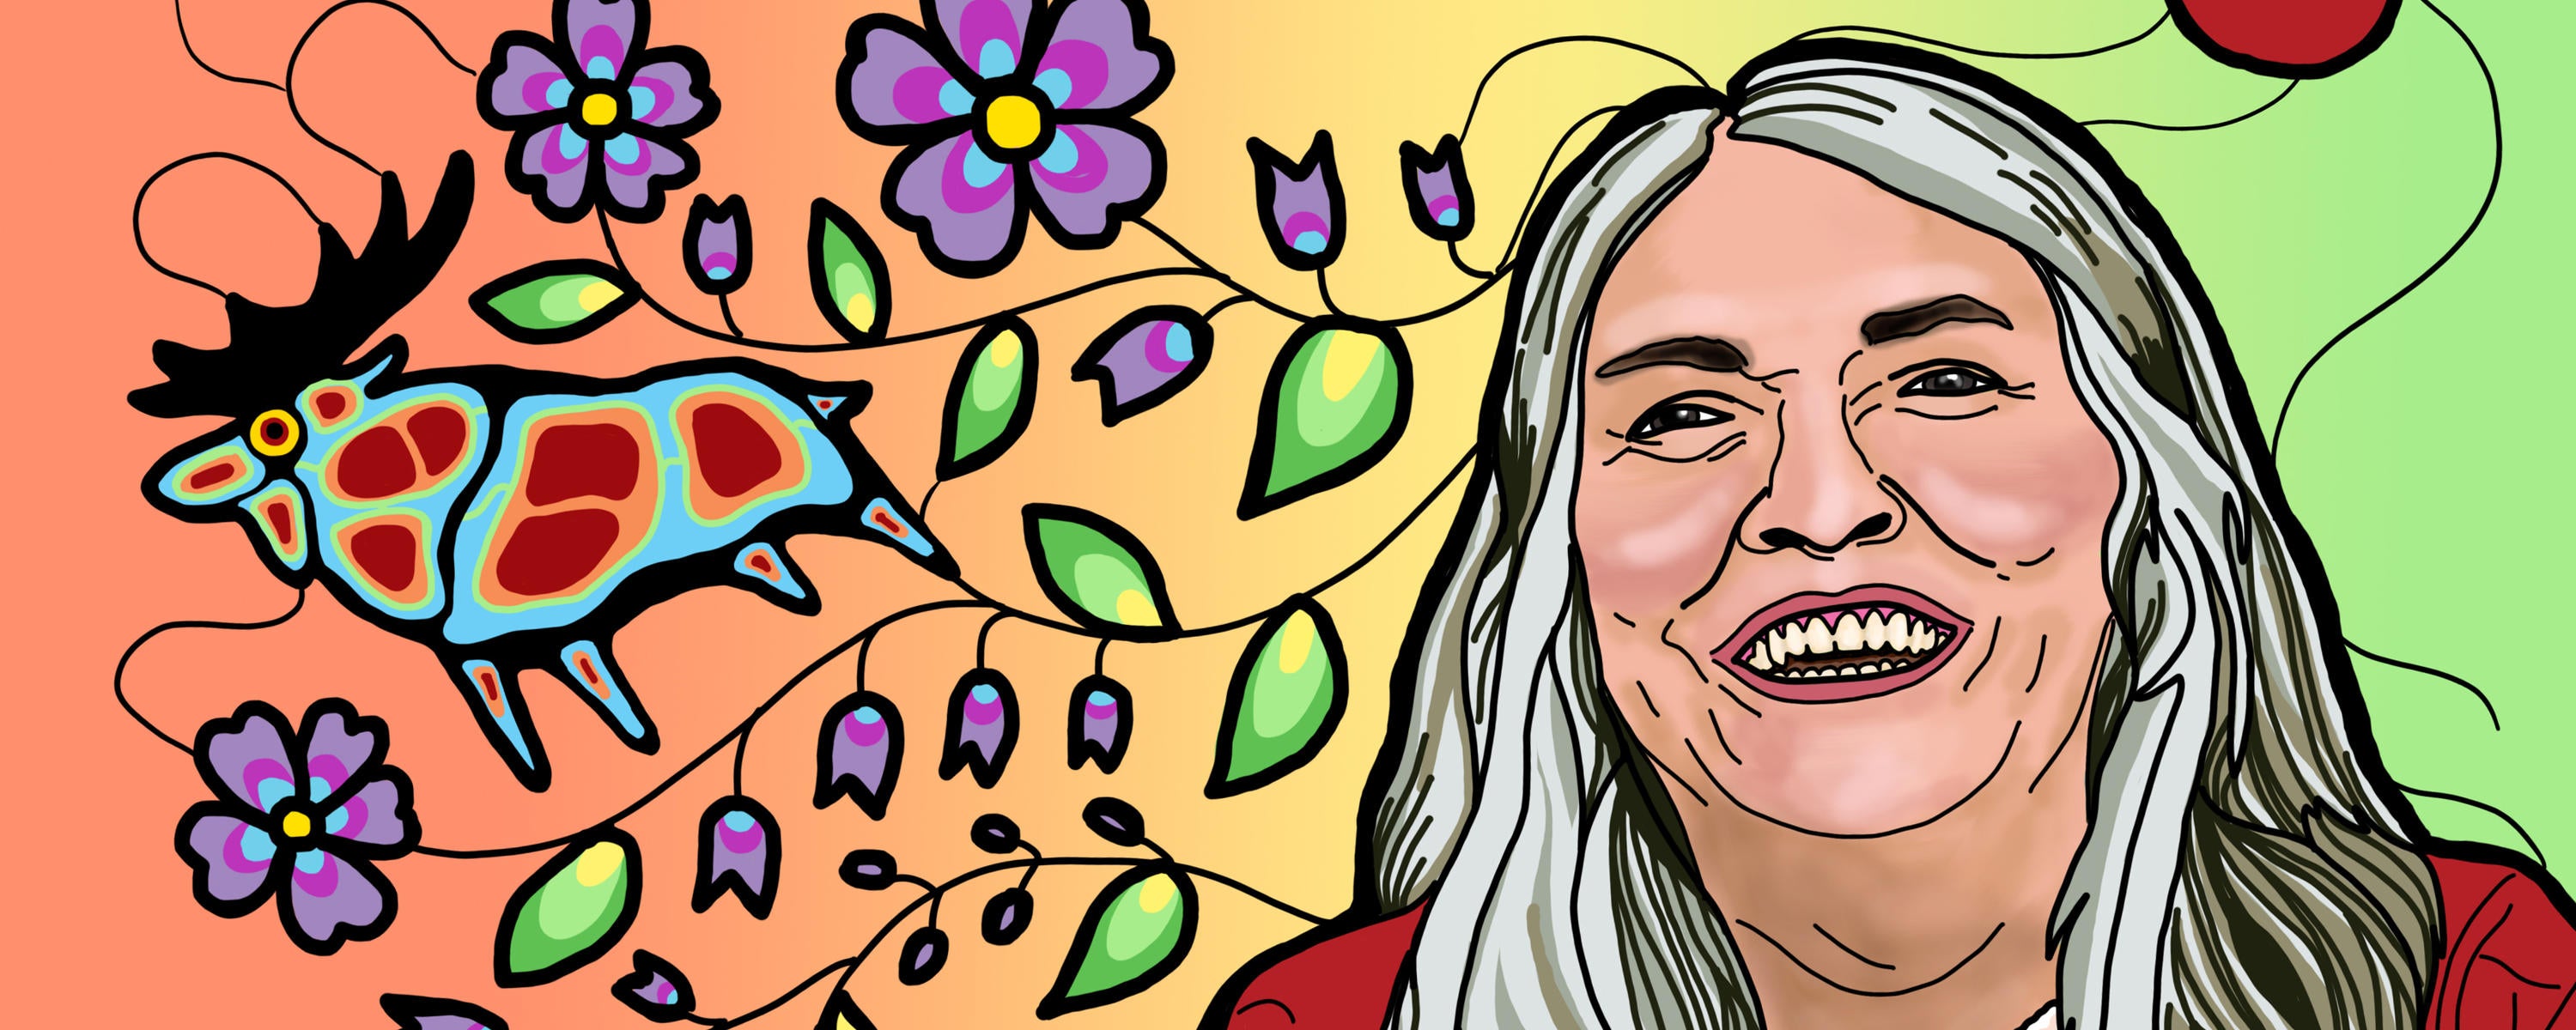 Lee Maracle illustration with animals and flowers